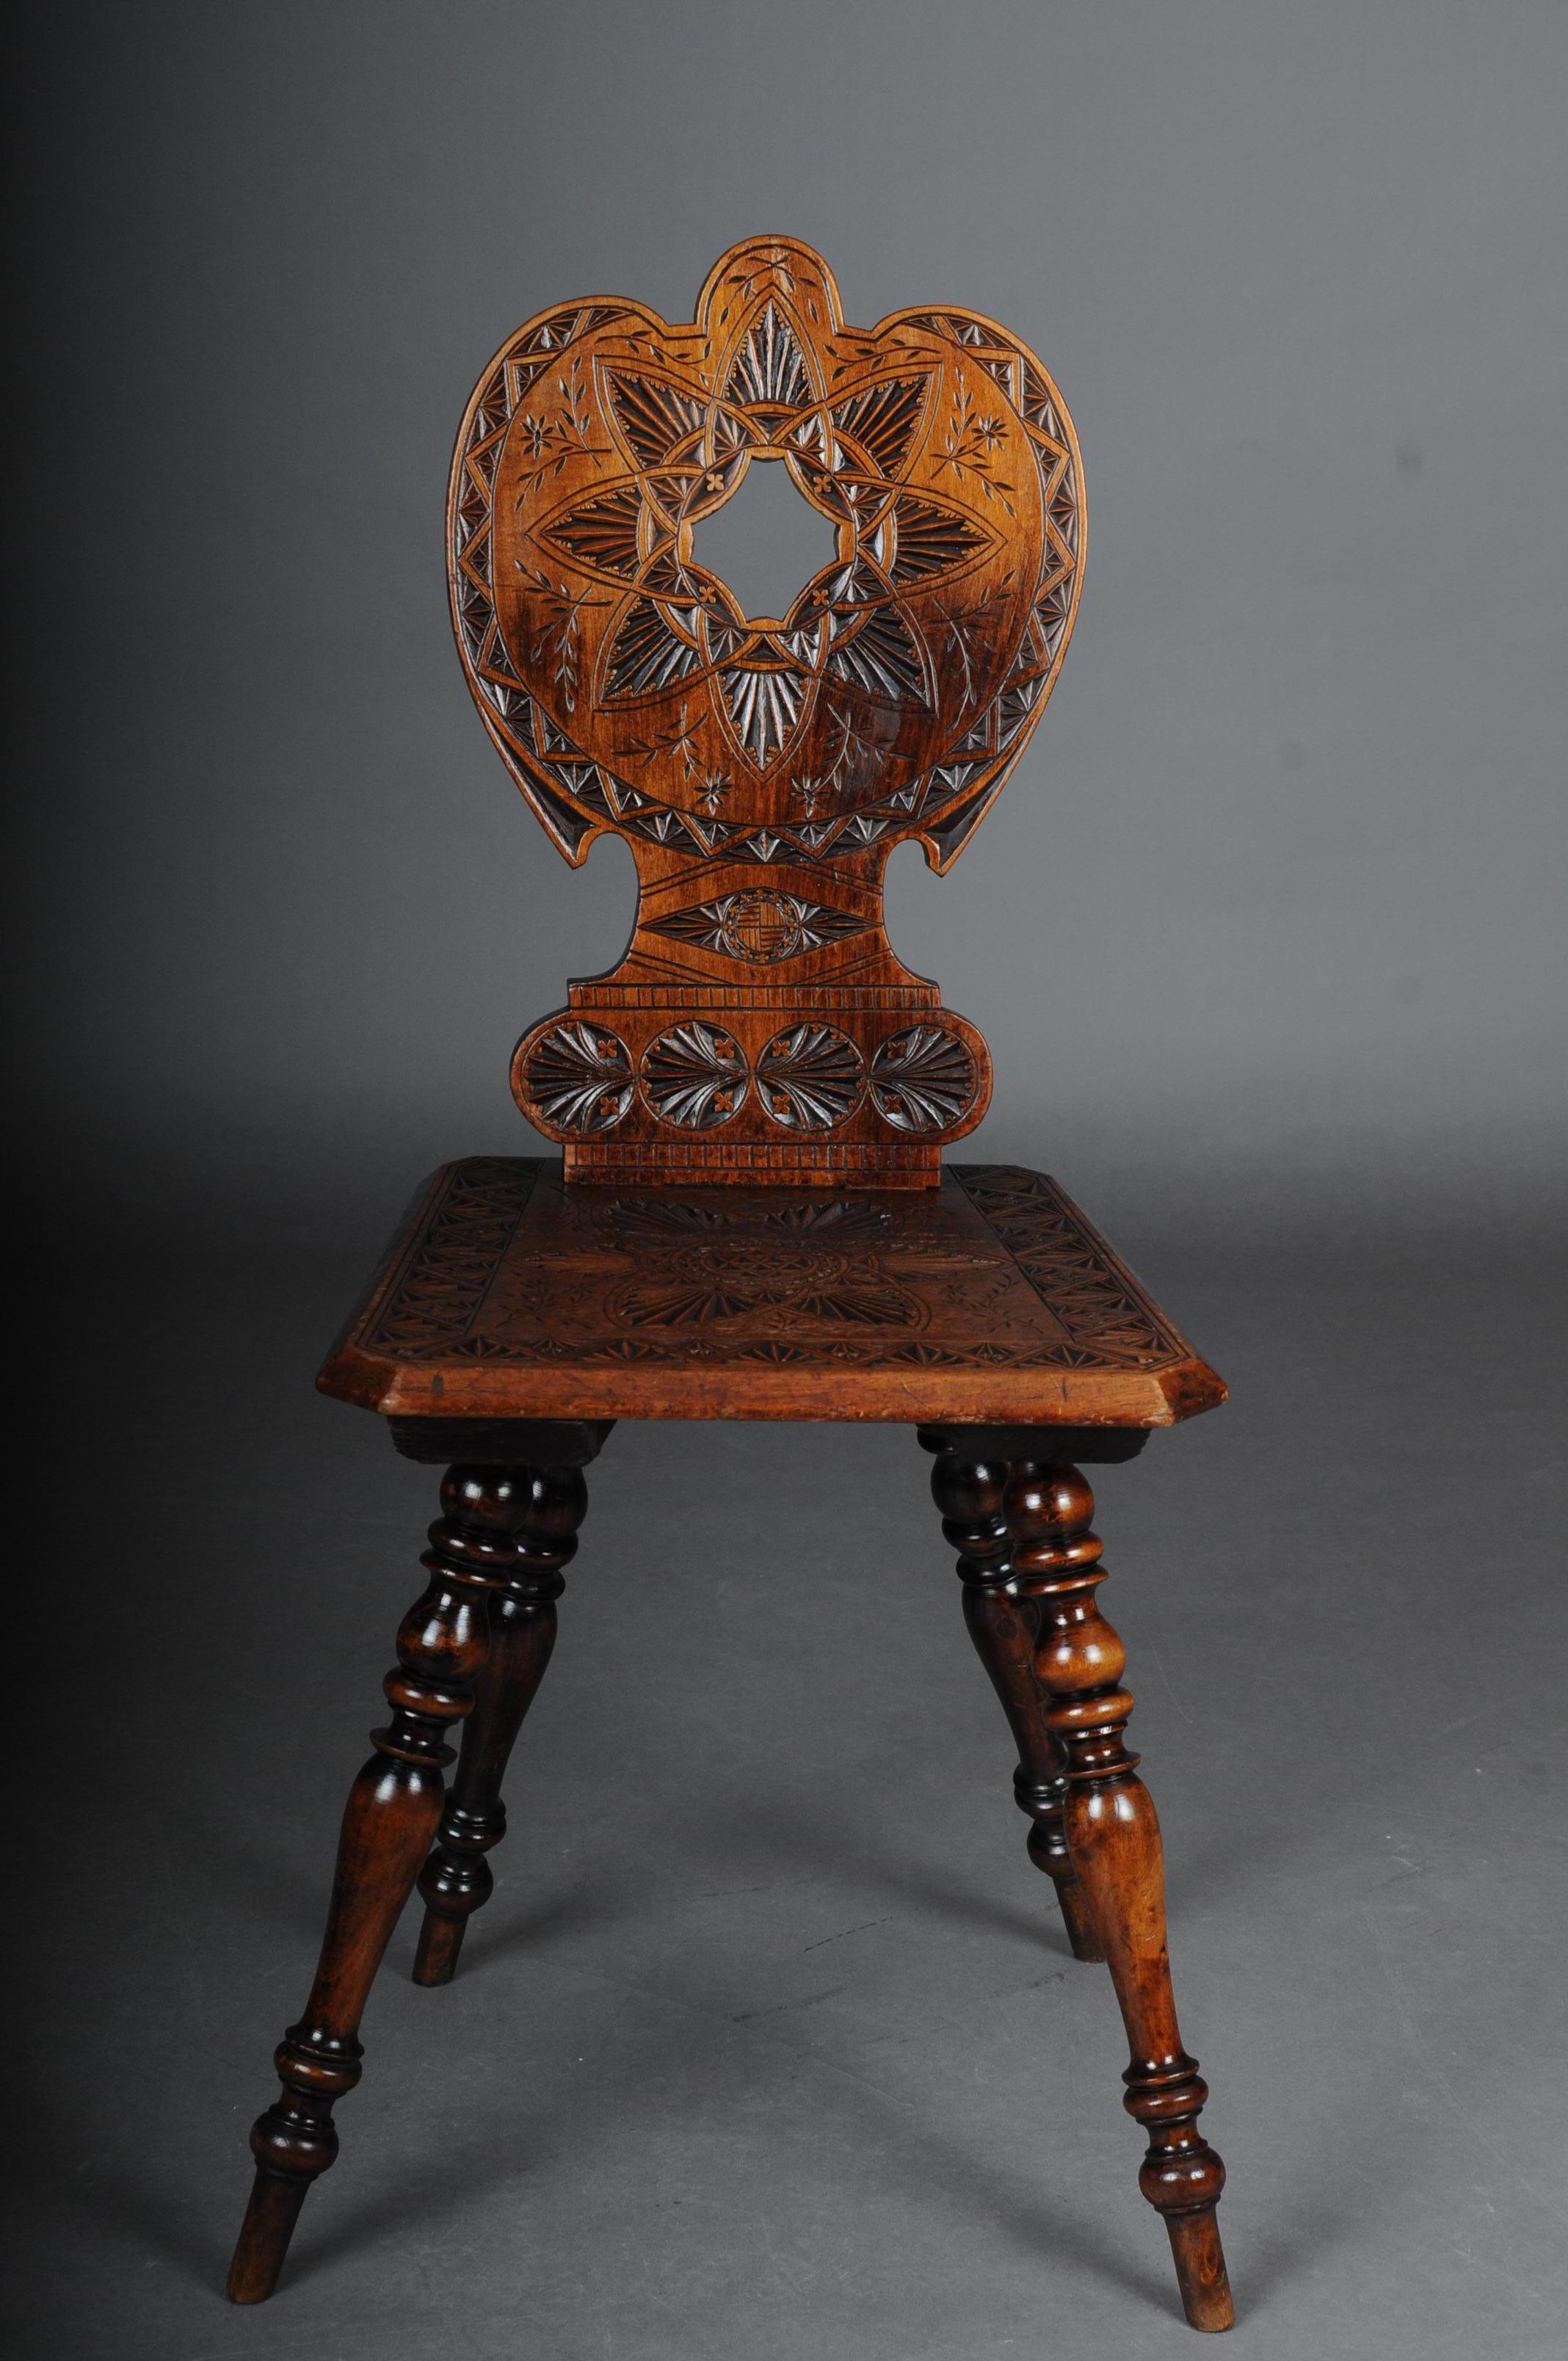 Antique neo Renaissance board chair historicism circa 1870, oak E.

Solid dark oak. Straight seat on turned and tapered legs.
Backrest with Davidstern notched carvings. Different decorative and false historicism chairs with rich